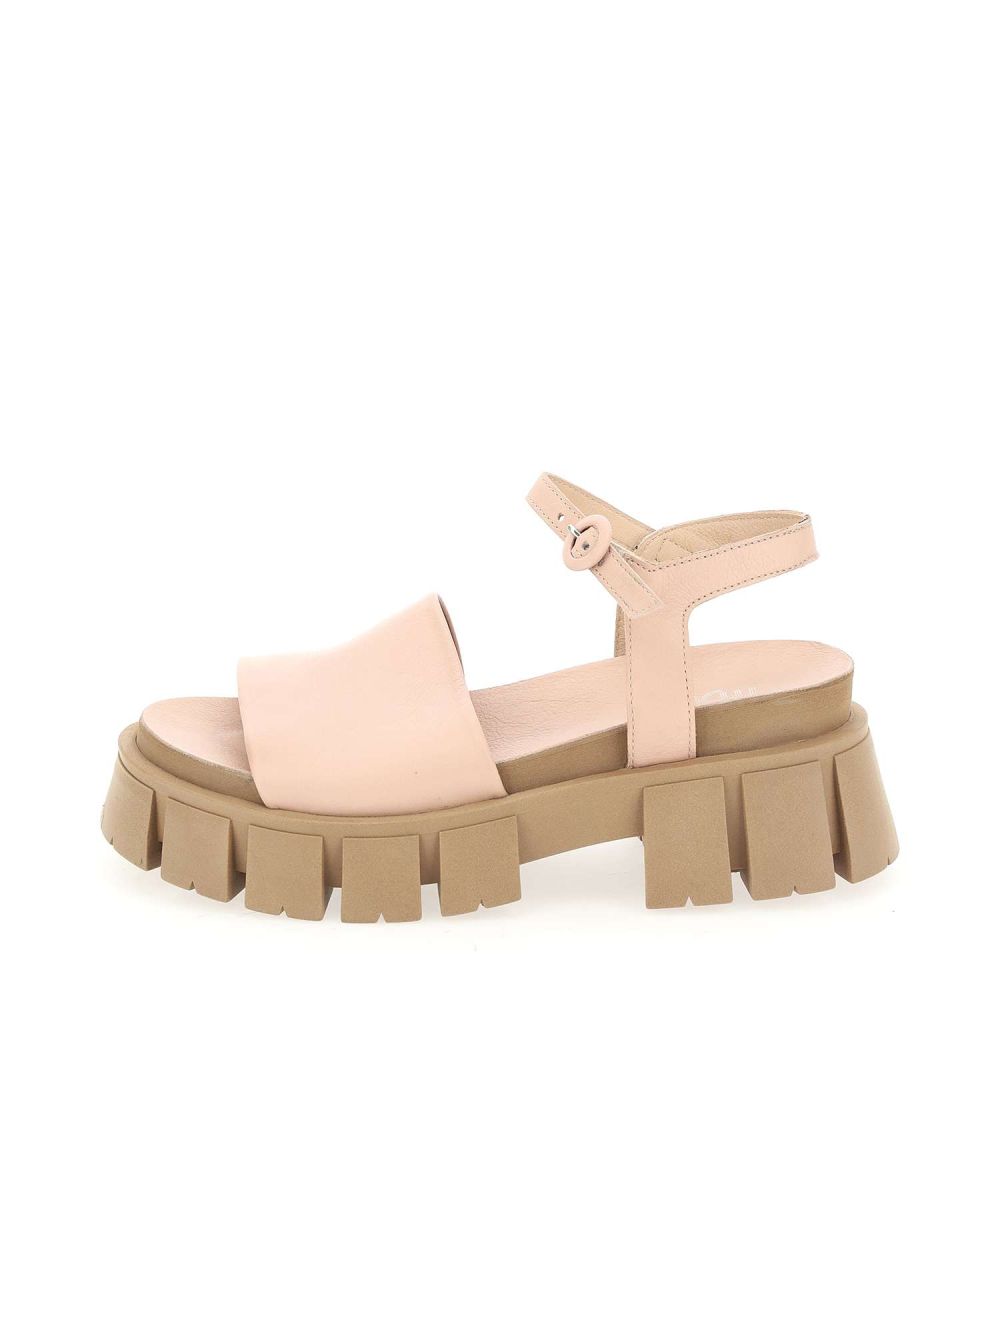 SANDALS ESAGERATA P57005 | Shoes, Ankle Boot and Sandals